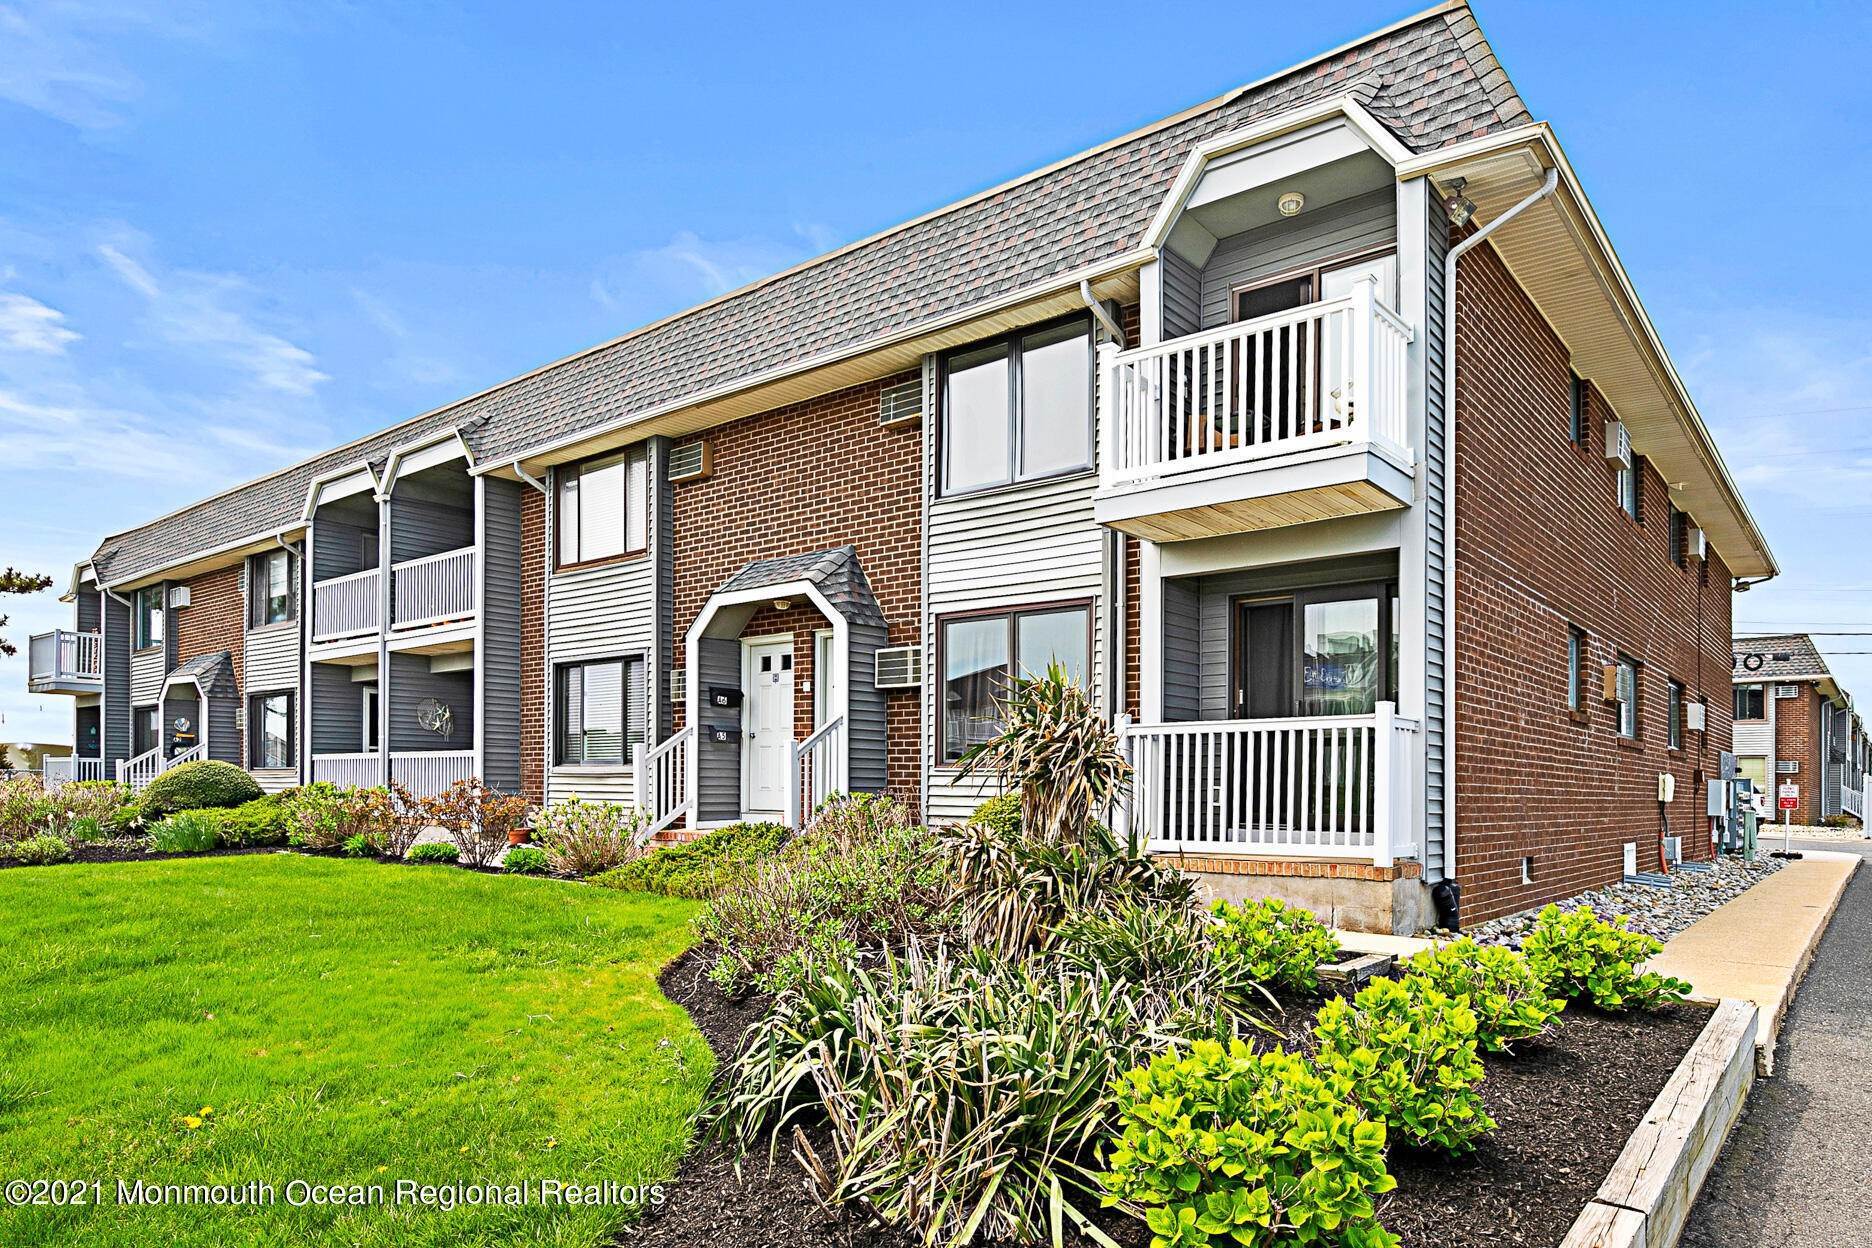 1. Apartments at 1382 Ocean Avenue Sea Bright, New Jersey 07760 United States